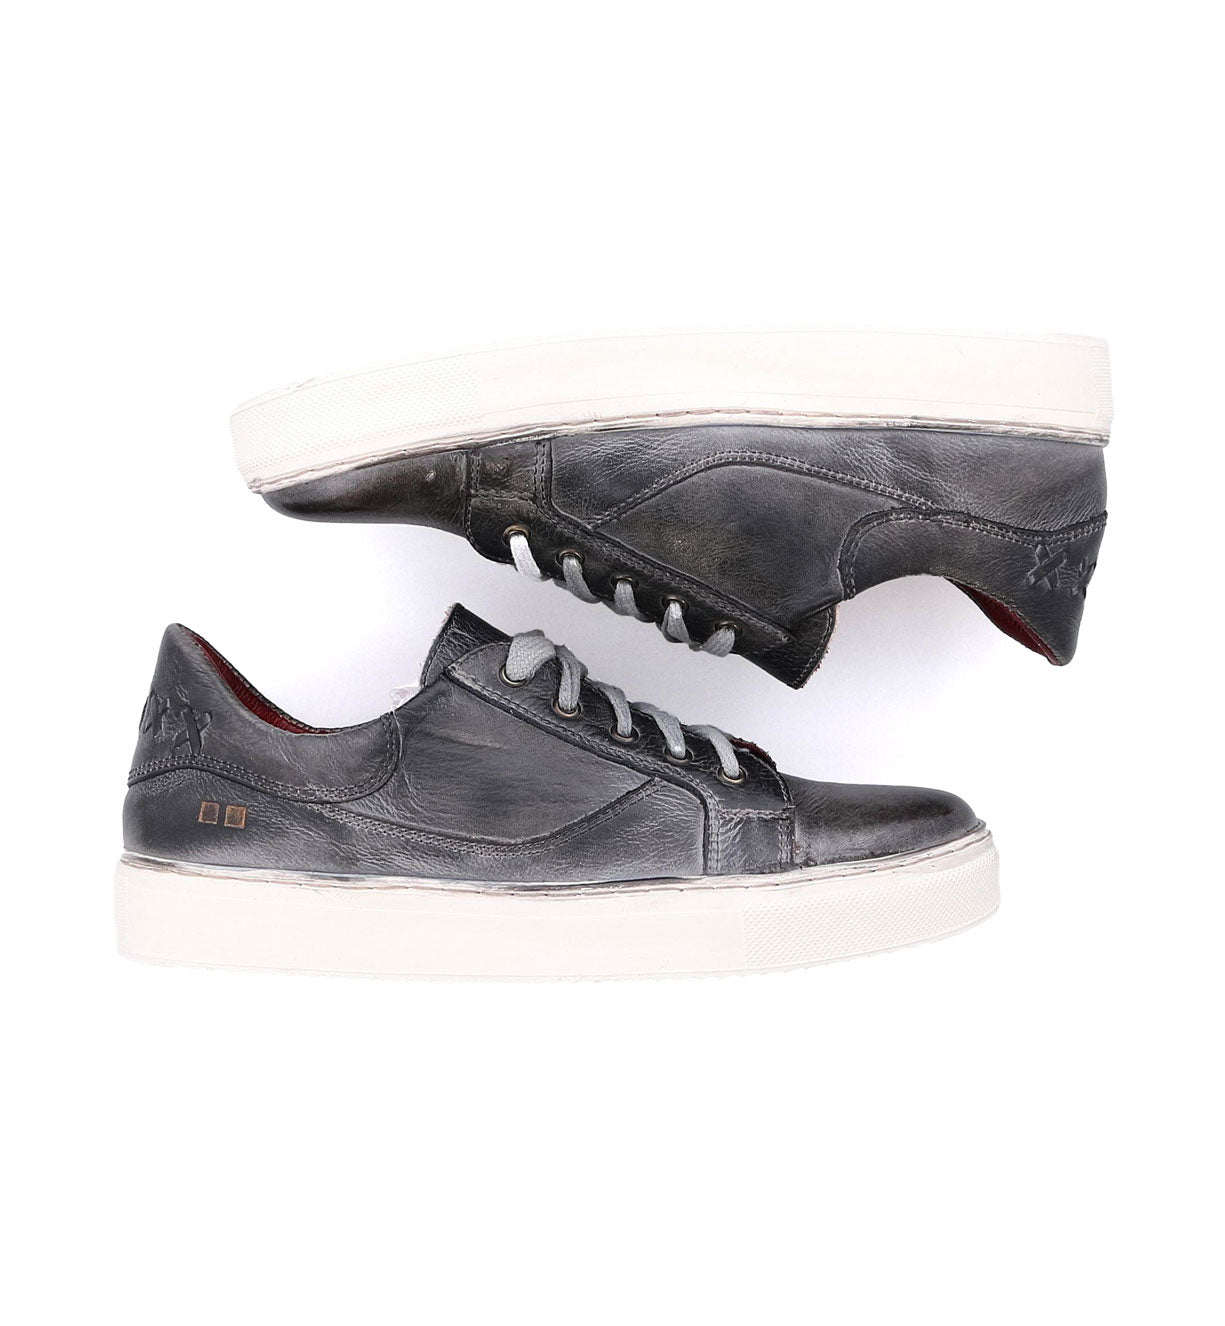 A pair of Bed Stu Azeli men's grey leather sneakers.